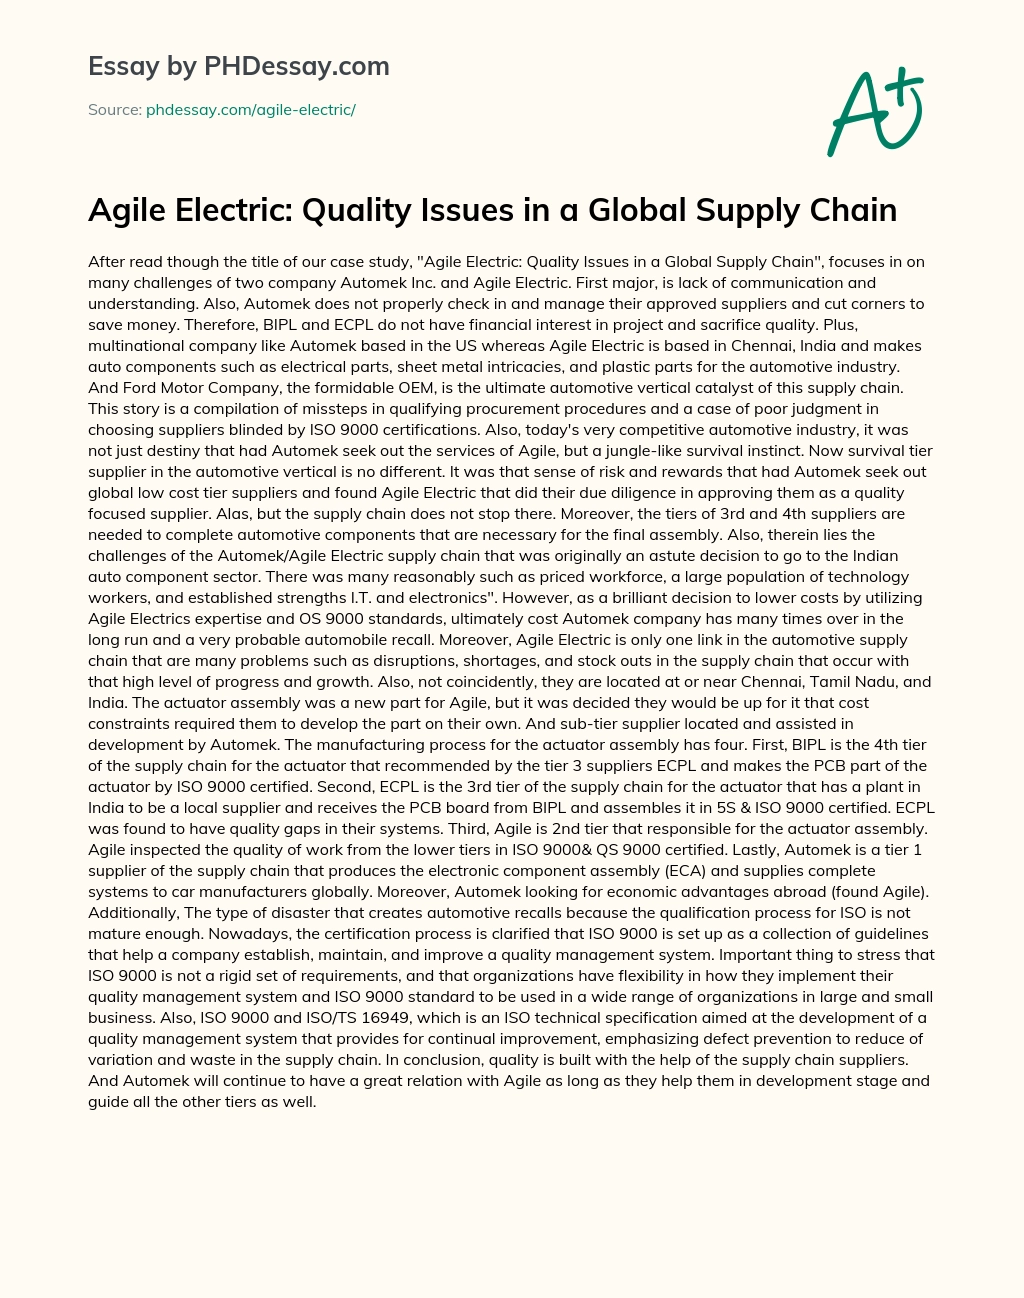 Agile Electric: Quality Issues in a Global Supply Chain essay